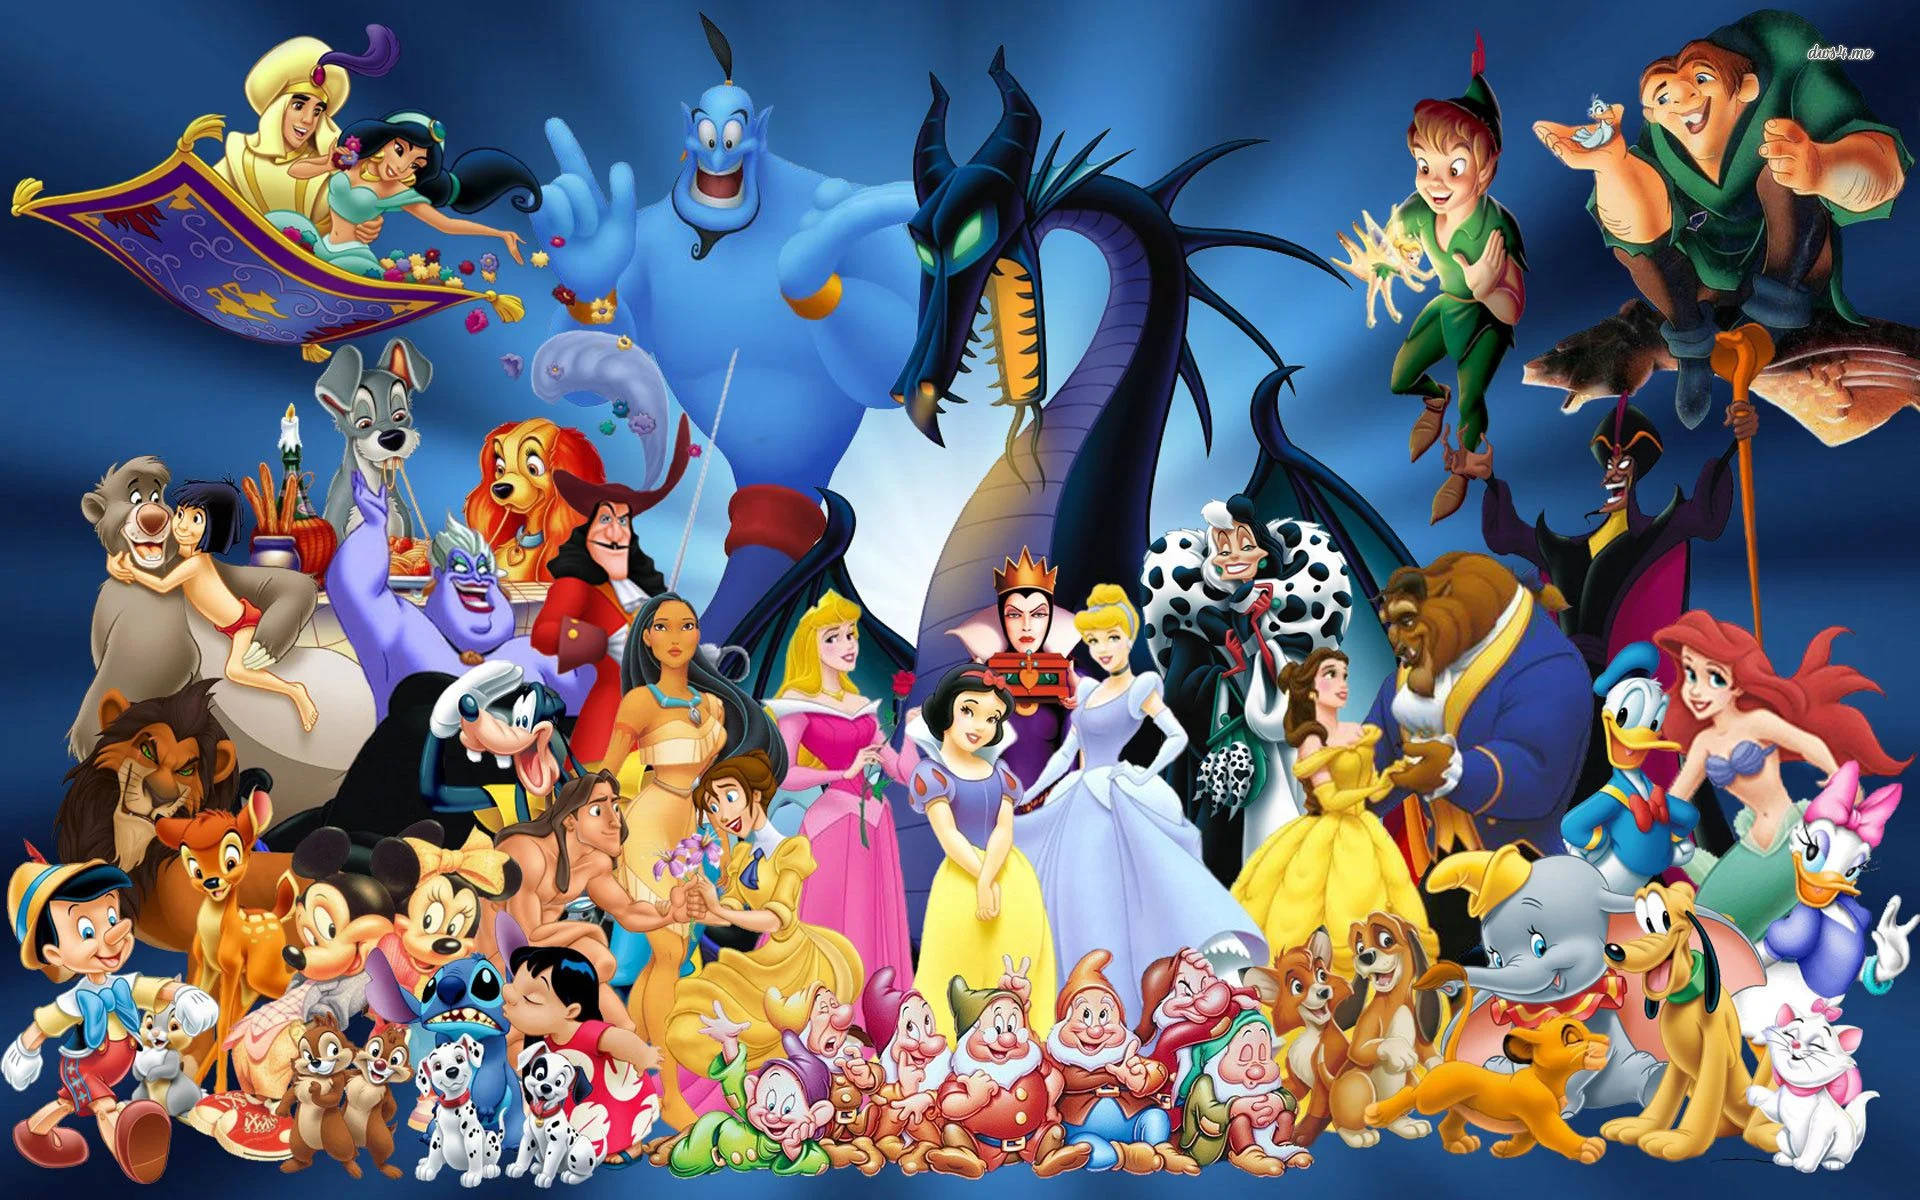 Top 999+ Disney Characters Wallpaper Full HD, 4K✅Free to Use